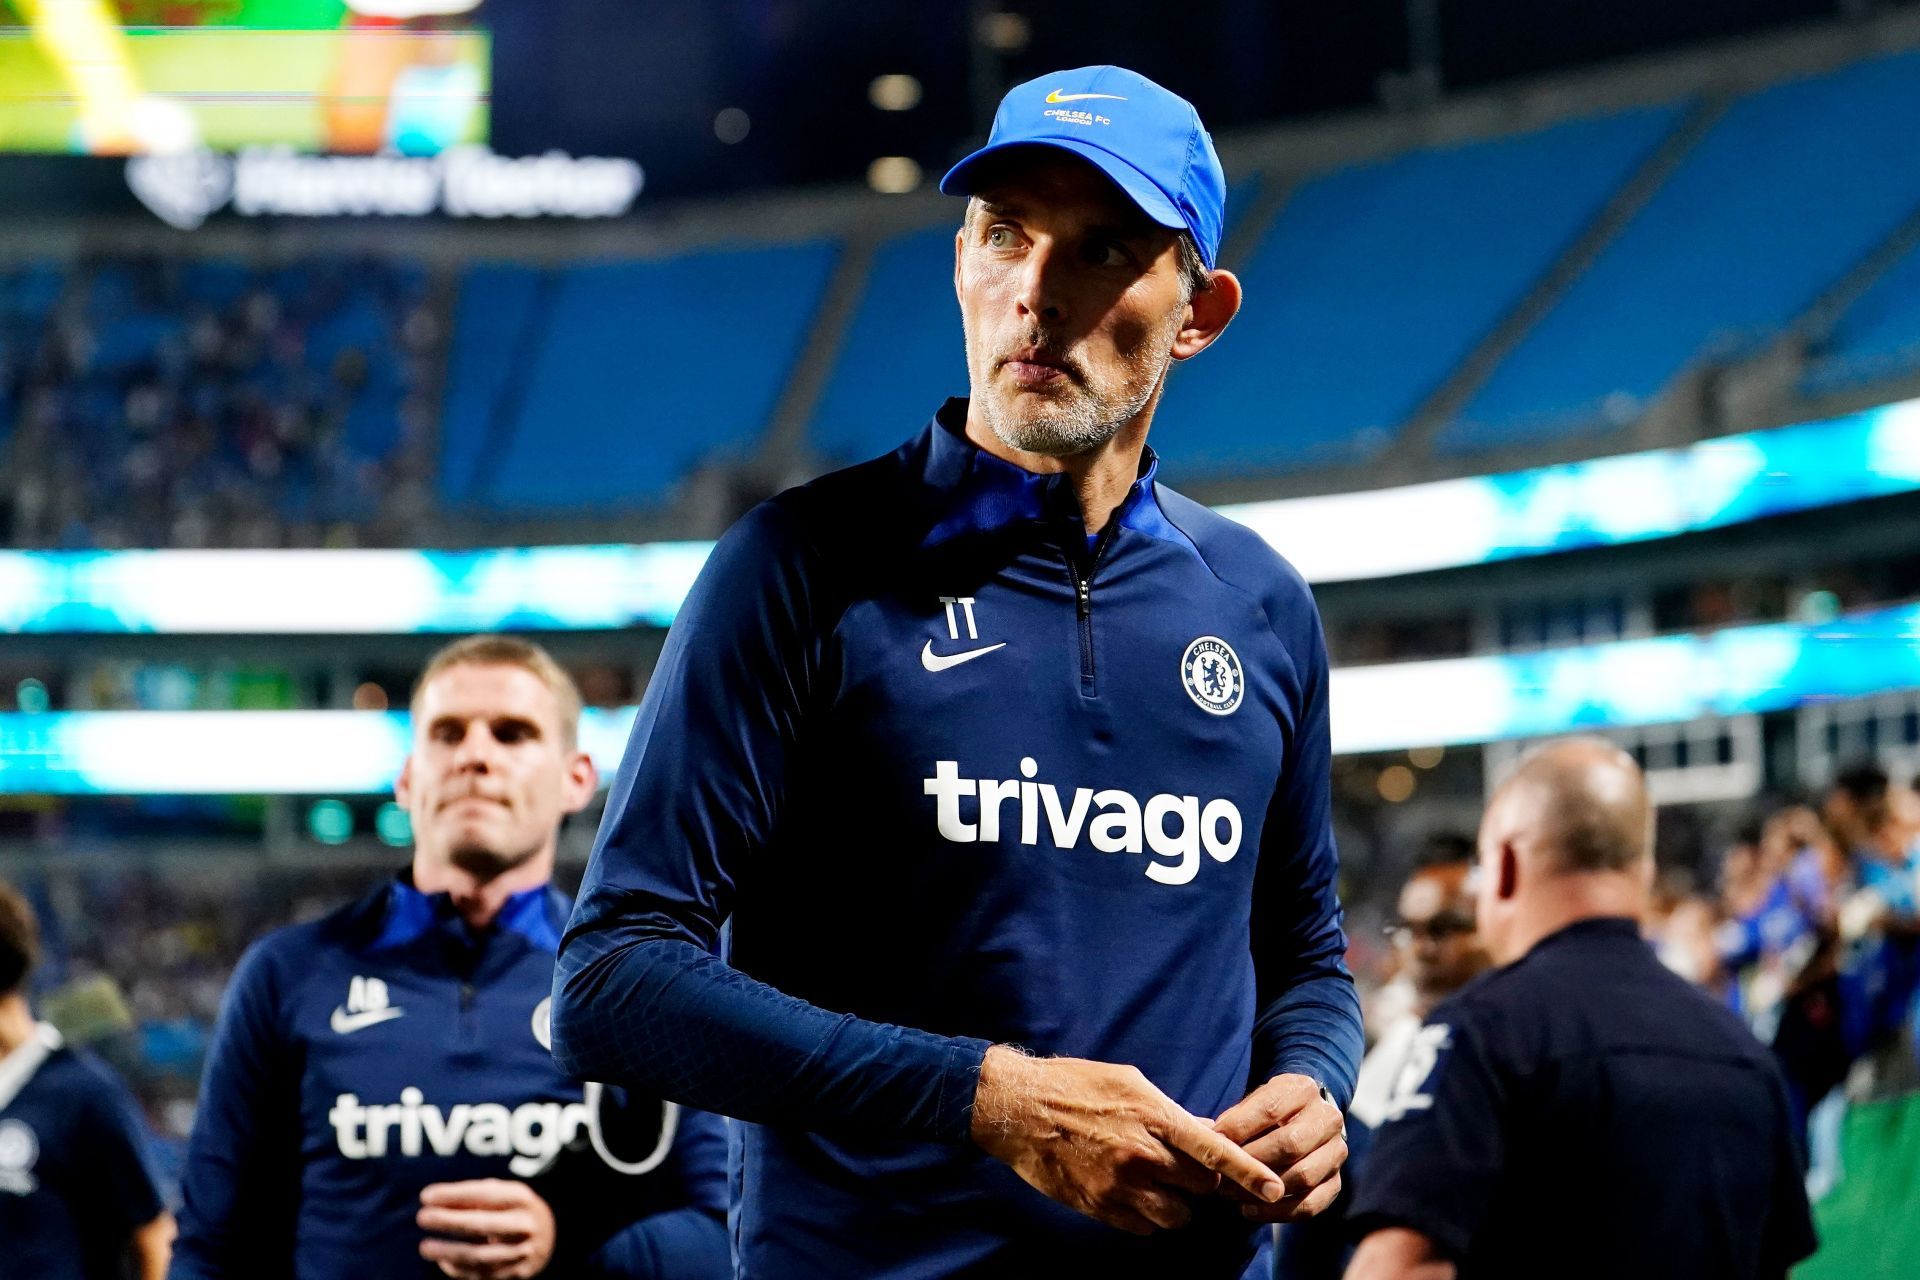 Chelsea manager Thomas Tuchel plans to upgrade his squad this summer